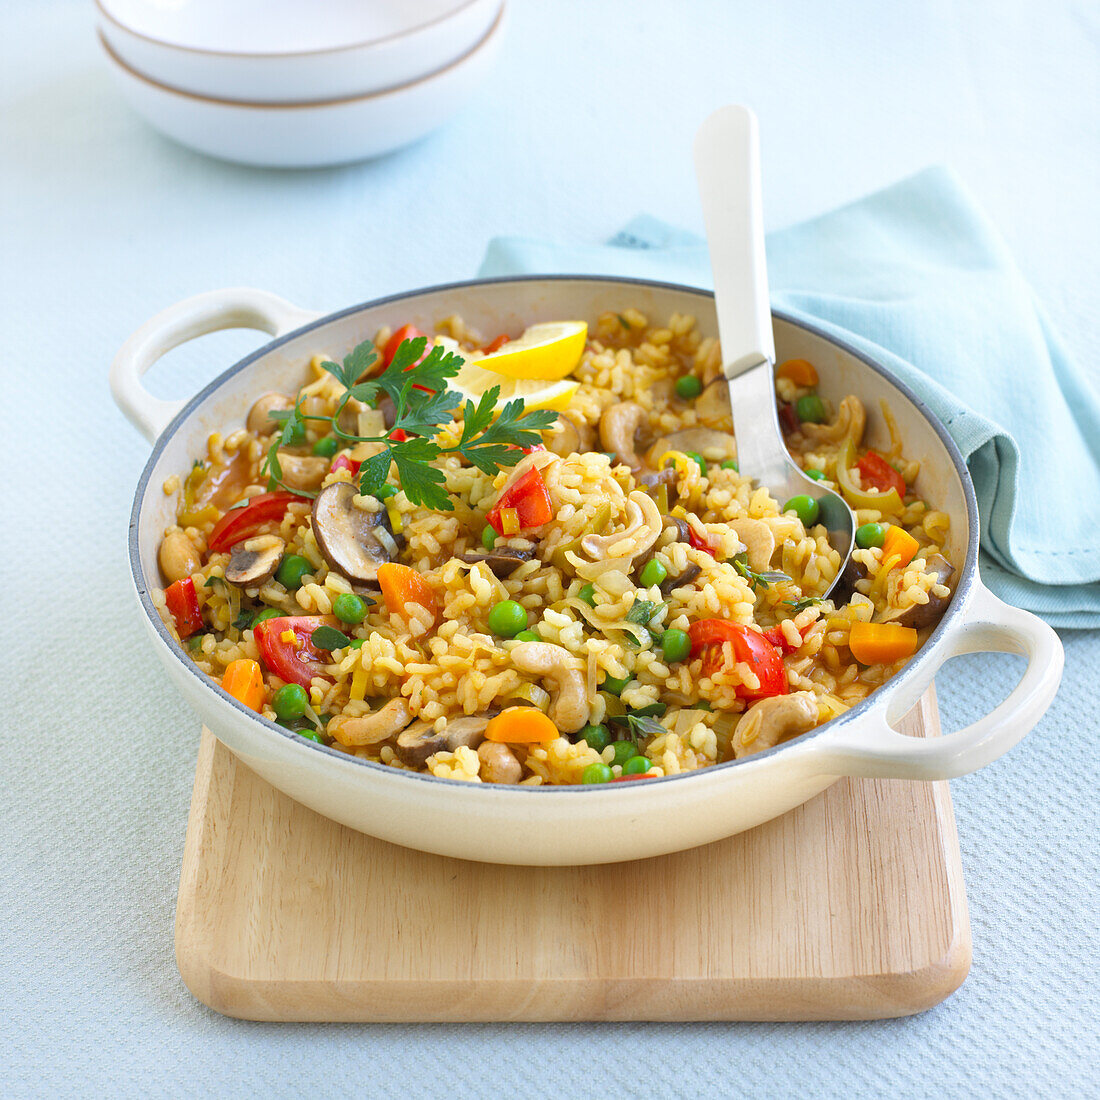 Cashew nut paella with peas, mushroom, carrots, and tomatoes